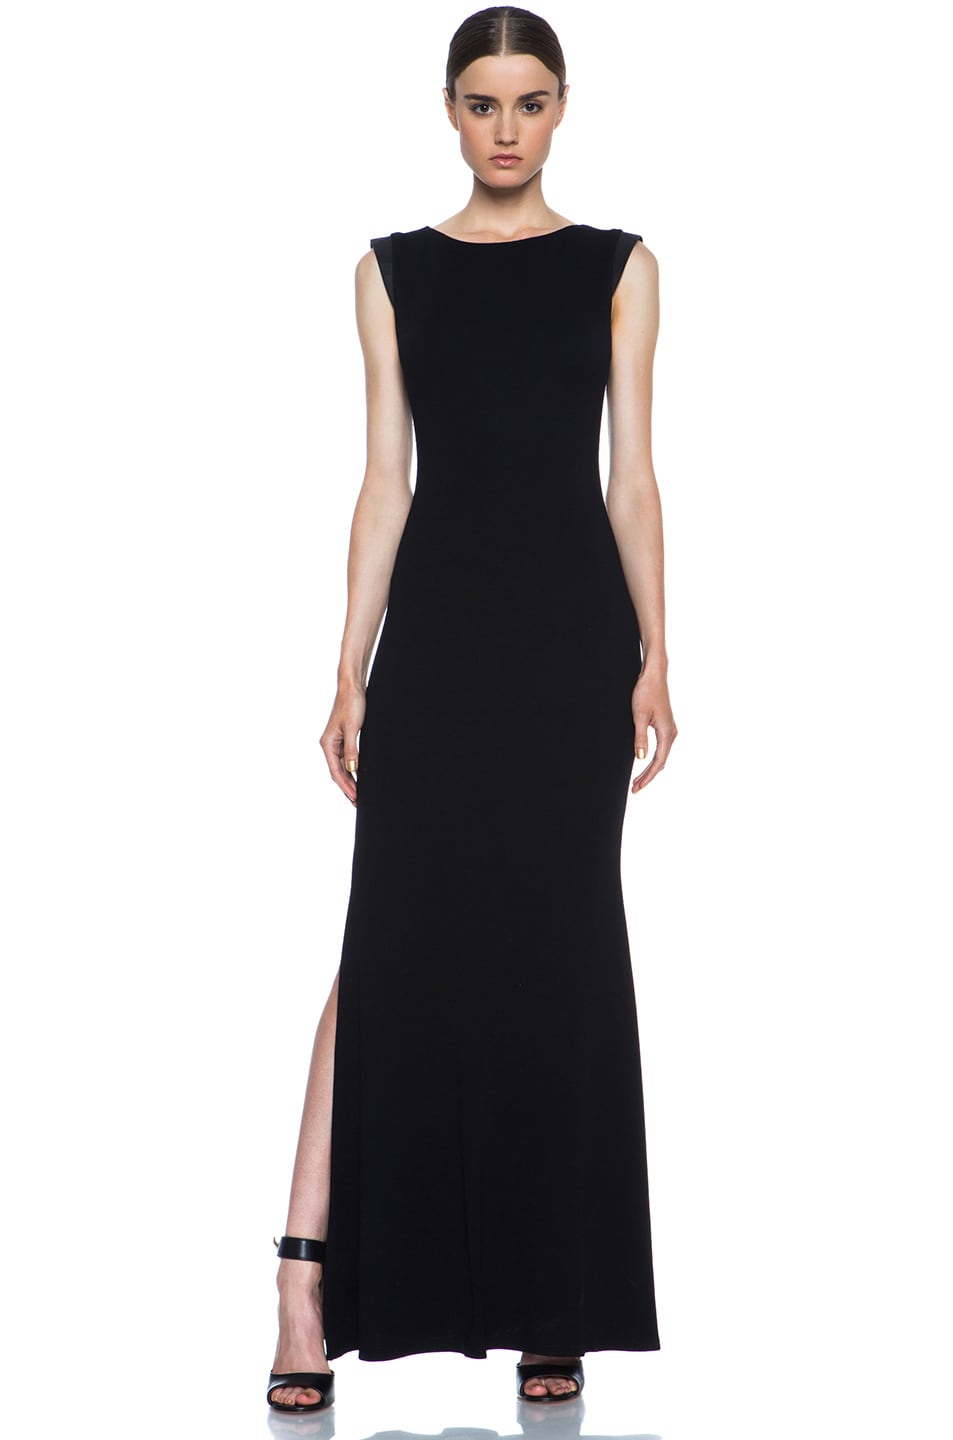 Alice + Olivia Joi Maxi Dress with Leather Shoulders in Black | FWRD